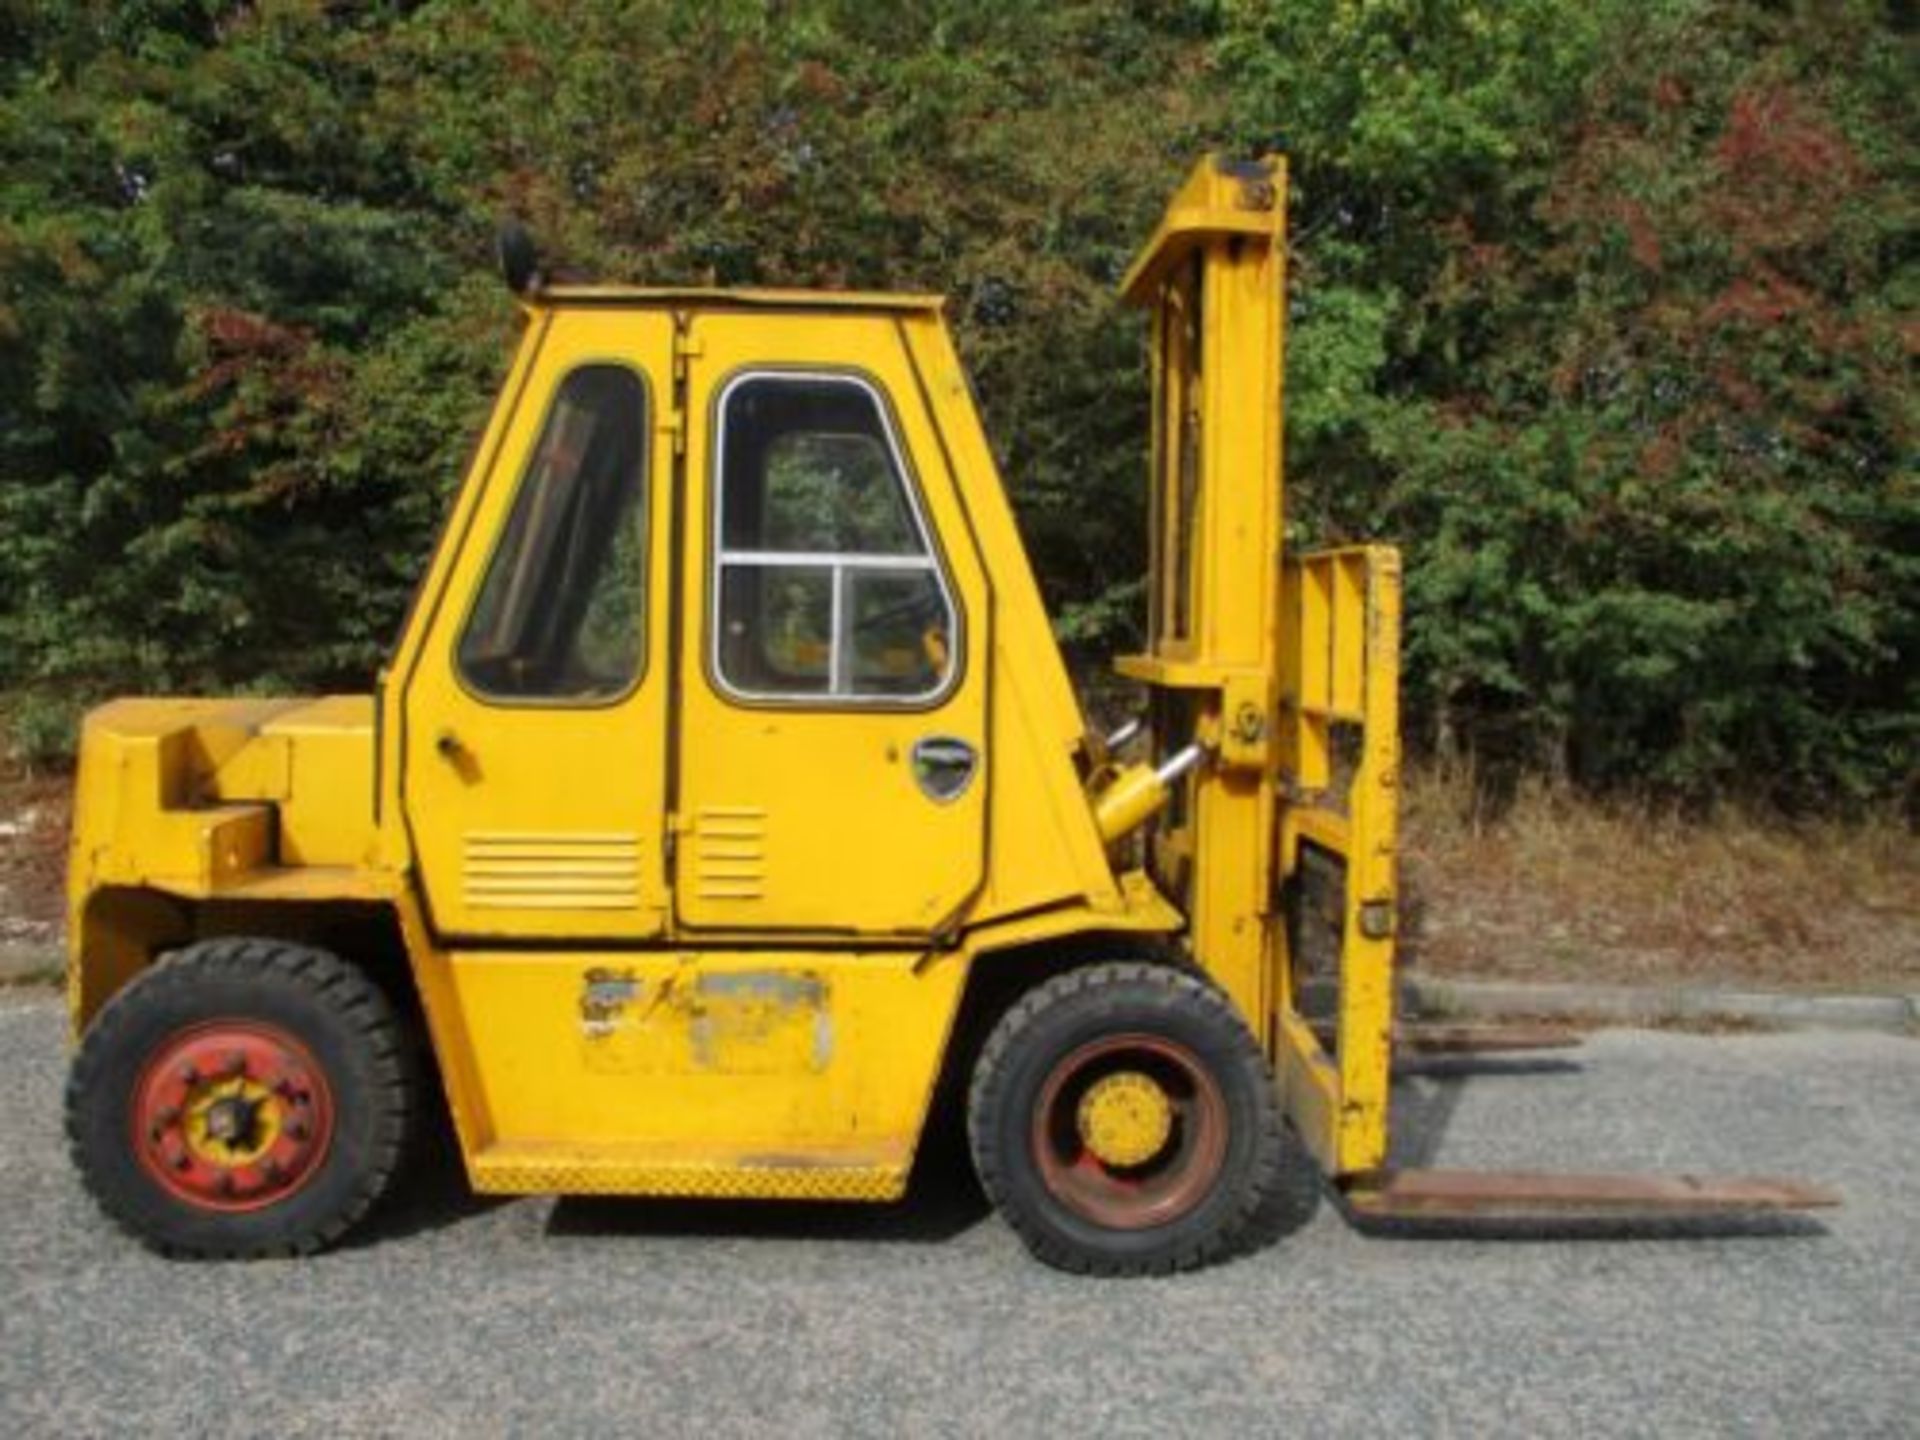 CLIMAX DA50 FORK LIFT FORKLIFT TRUCK STACKER 5 TON LIFT 6 7 8 10 DELIVERY - Image 7 of 12